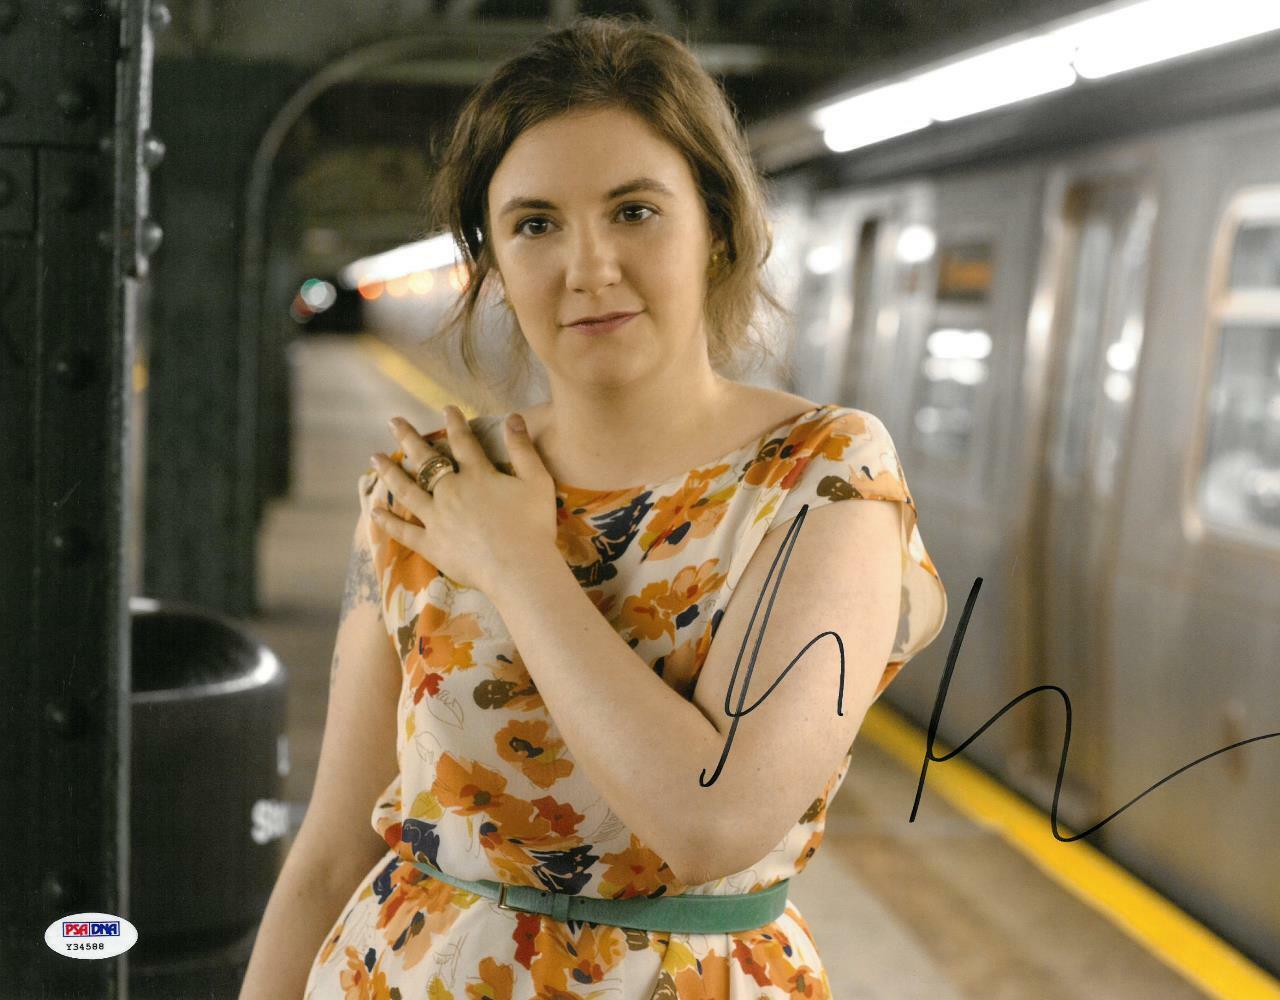 Lena Dunham Signed Authentic Autographed 11x14 Photo Poster painting PSA/DNA #Y34588